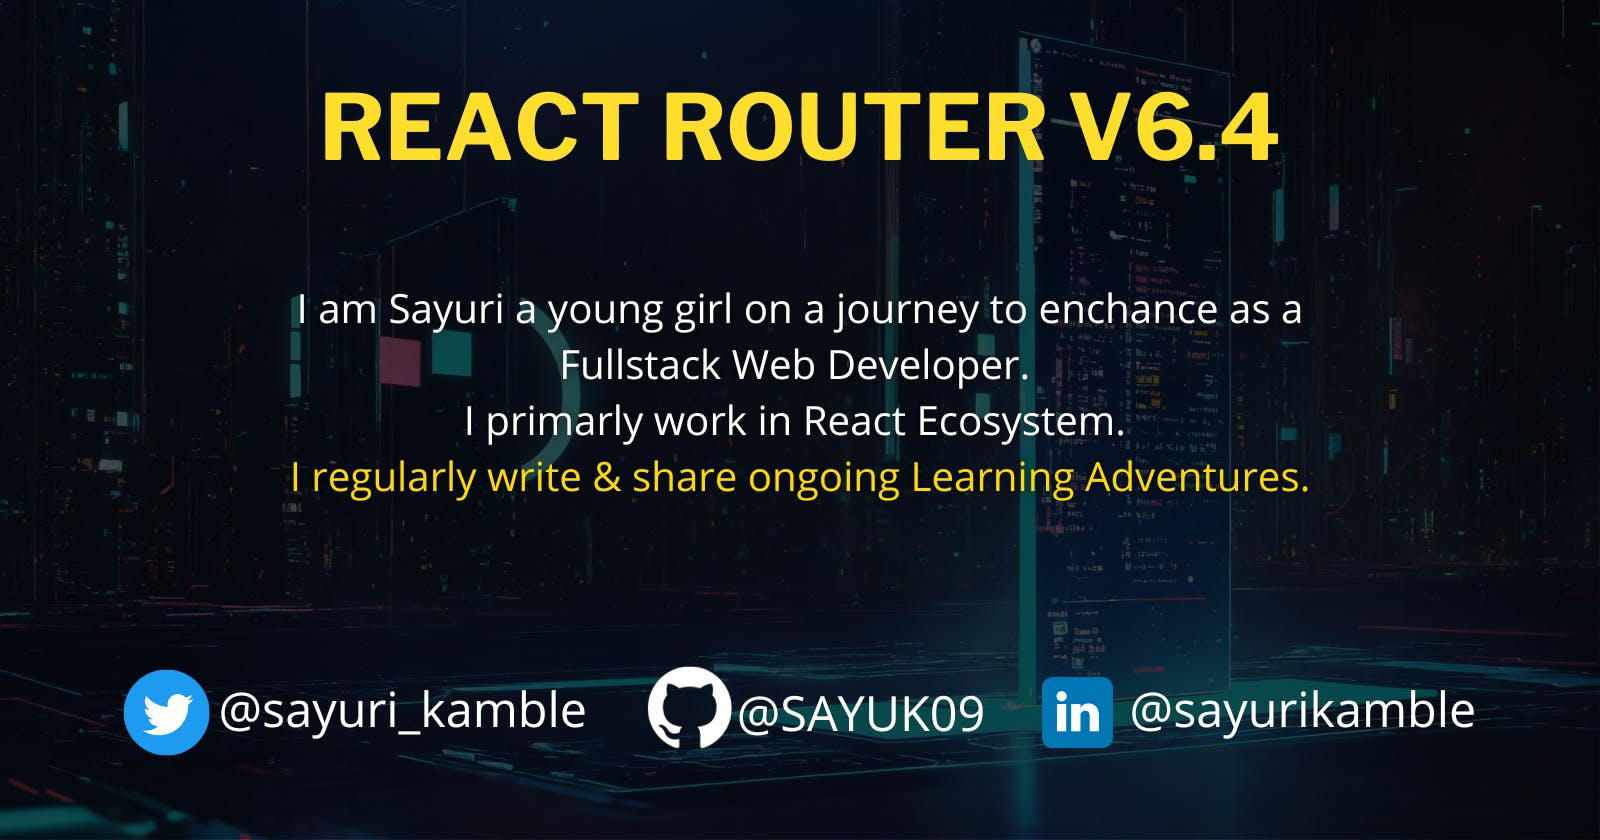 Routing with React Router v6.4